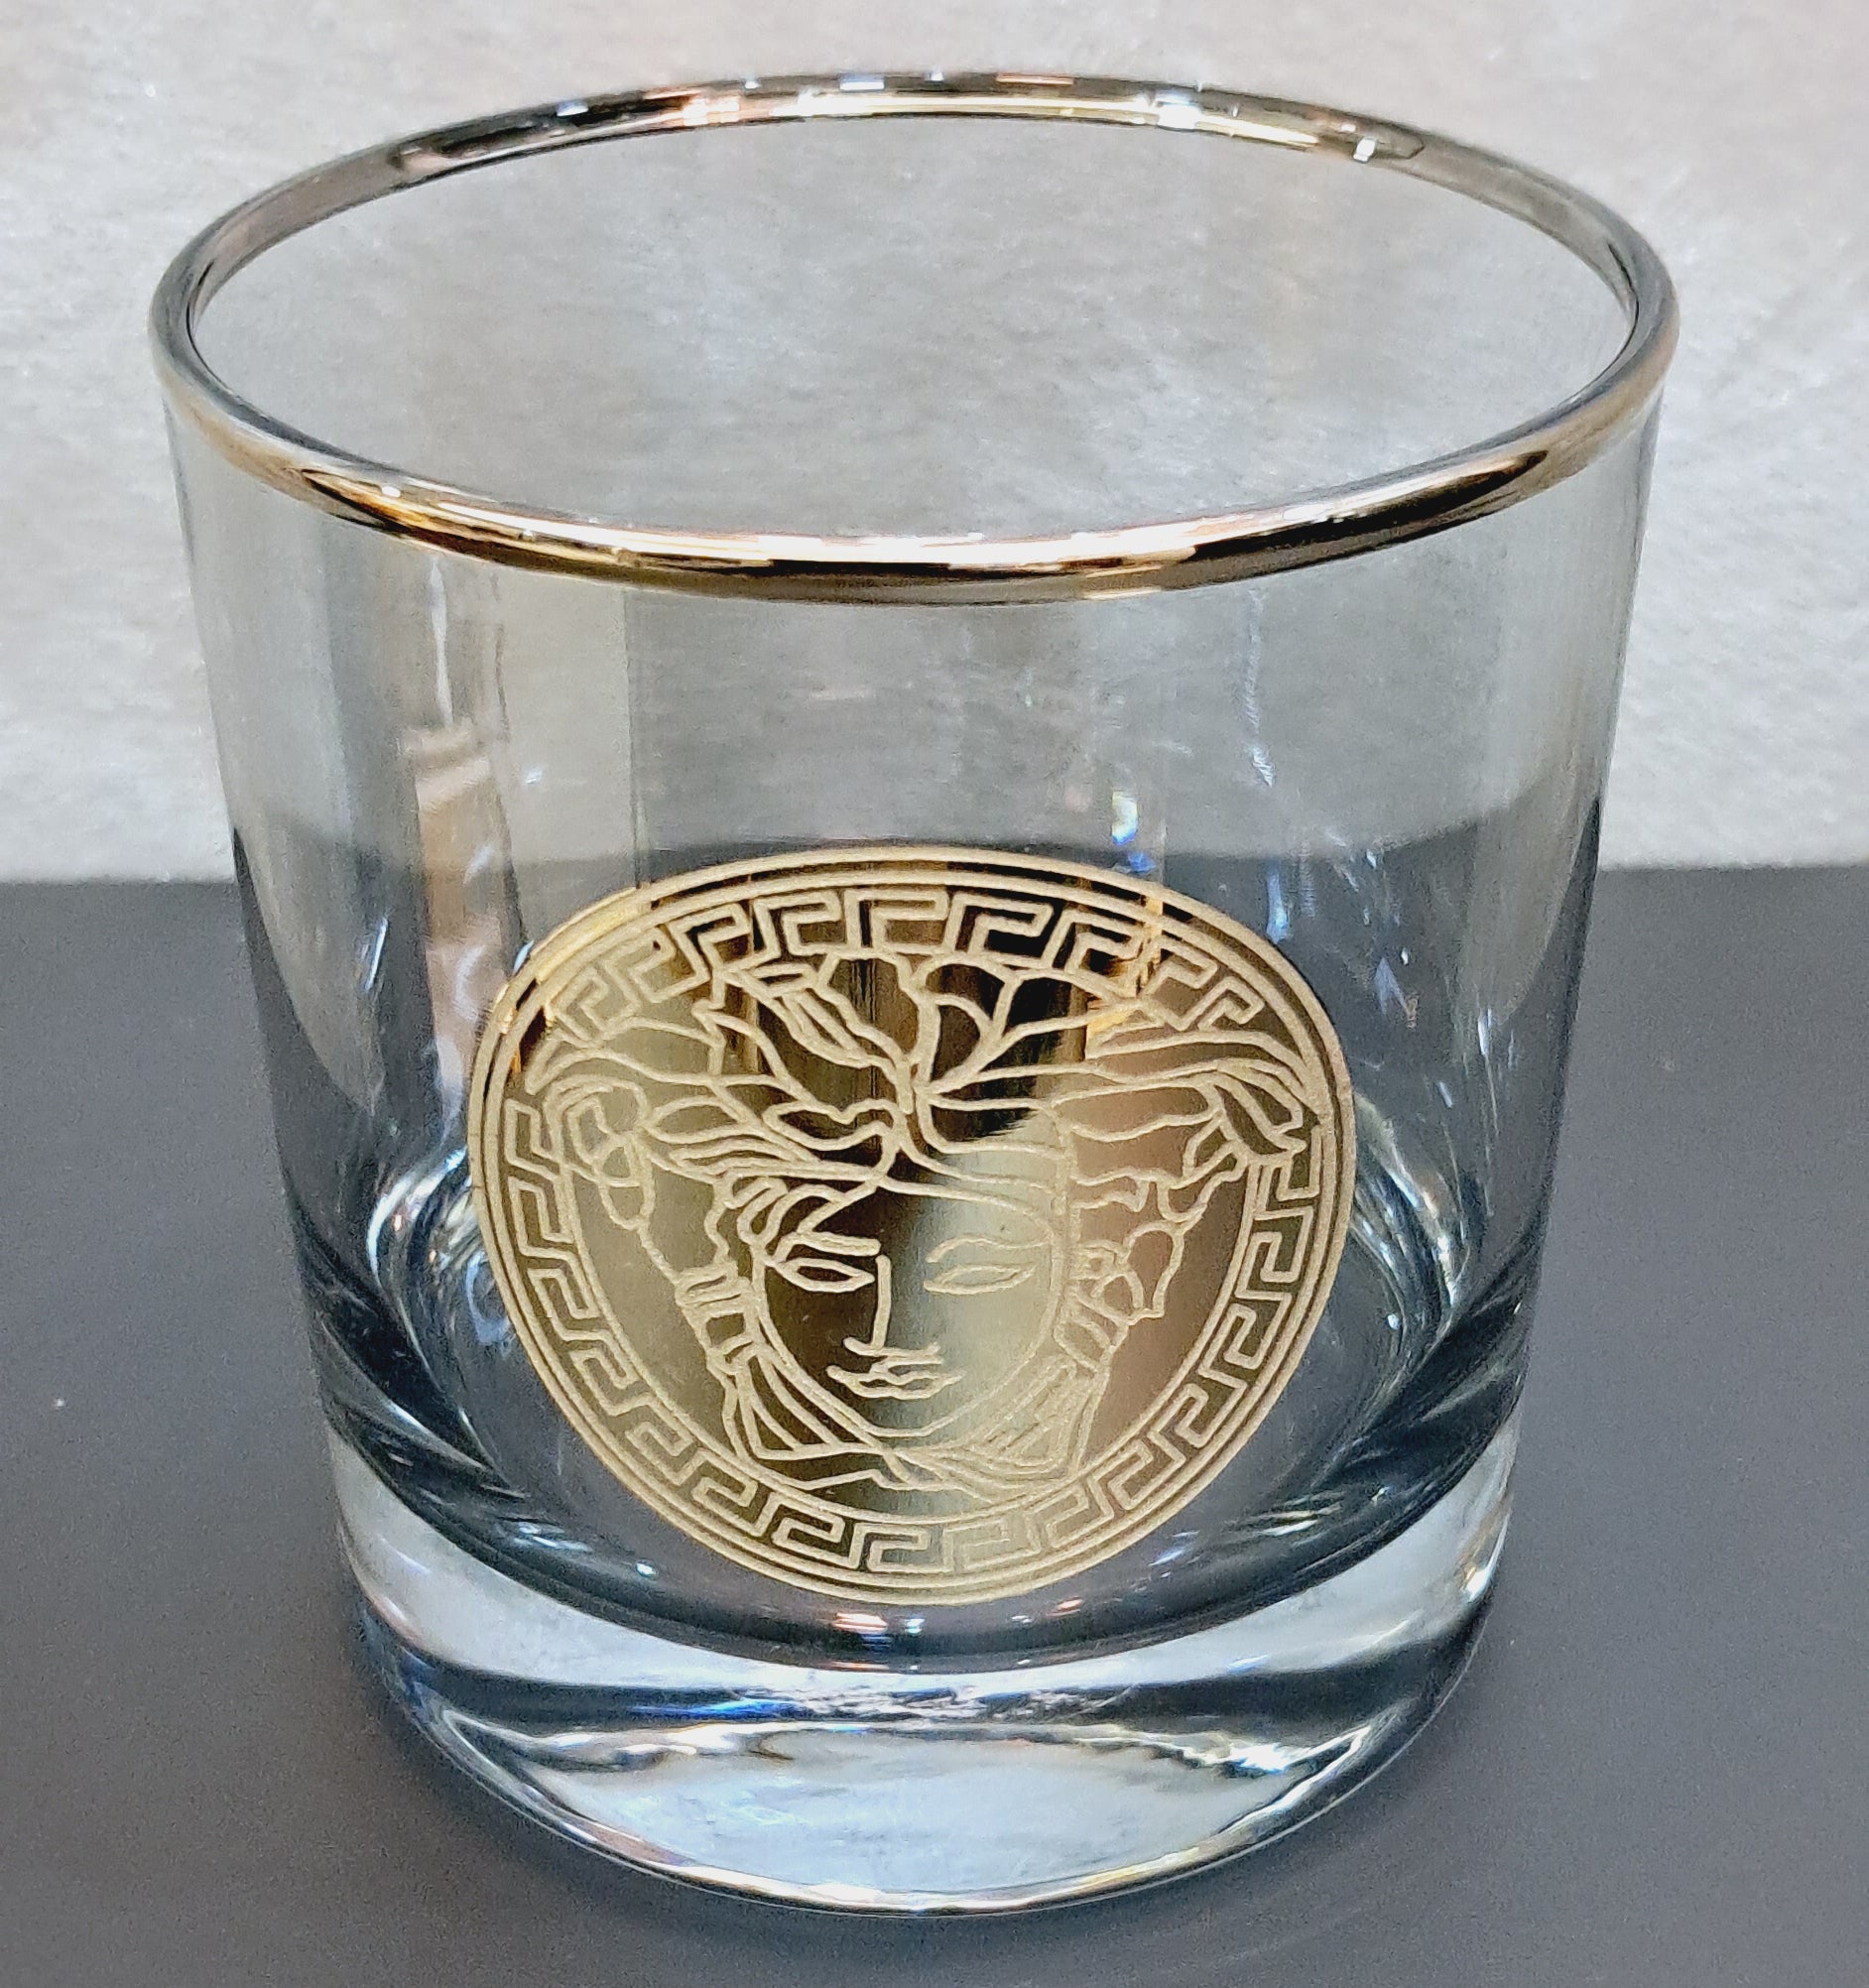 Hand Crafted Gold Decorated Whiskey Glasses, Capacity:360 ML for Home and Kitchen - Ideal Gift for Housewarming